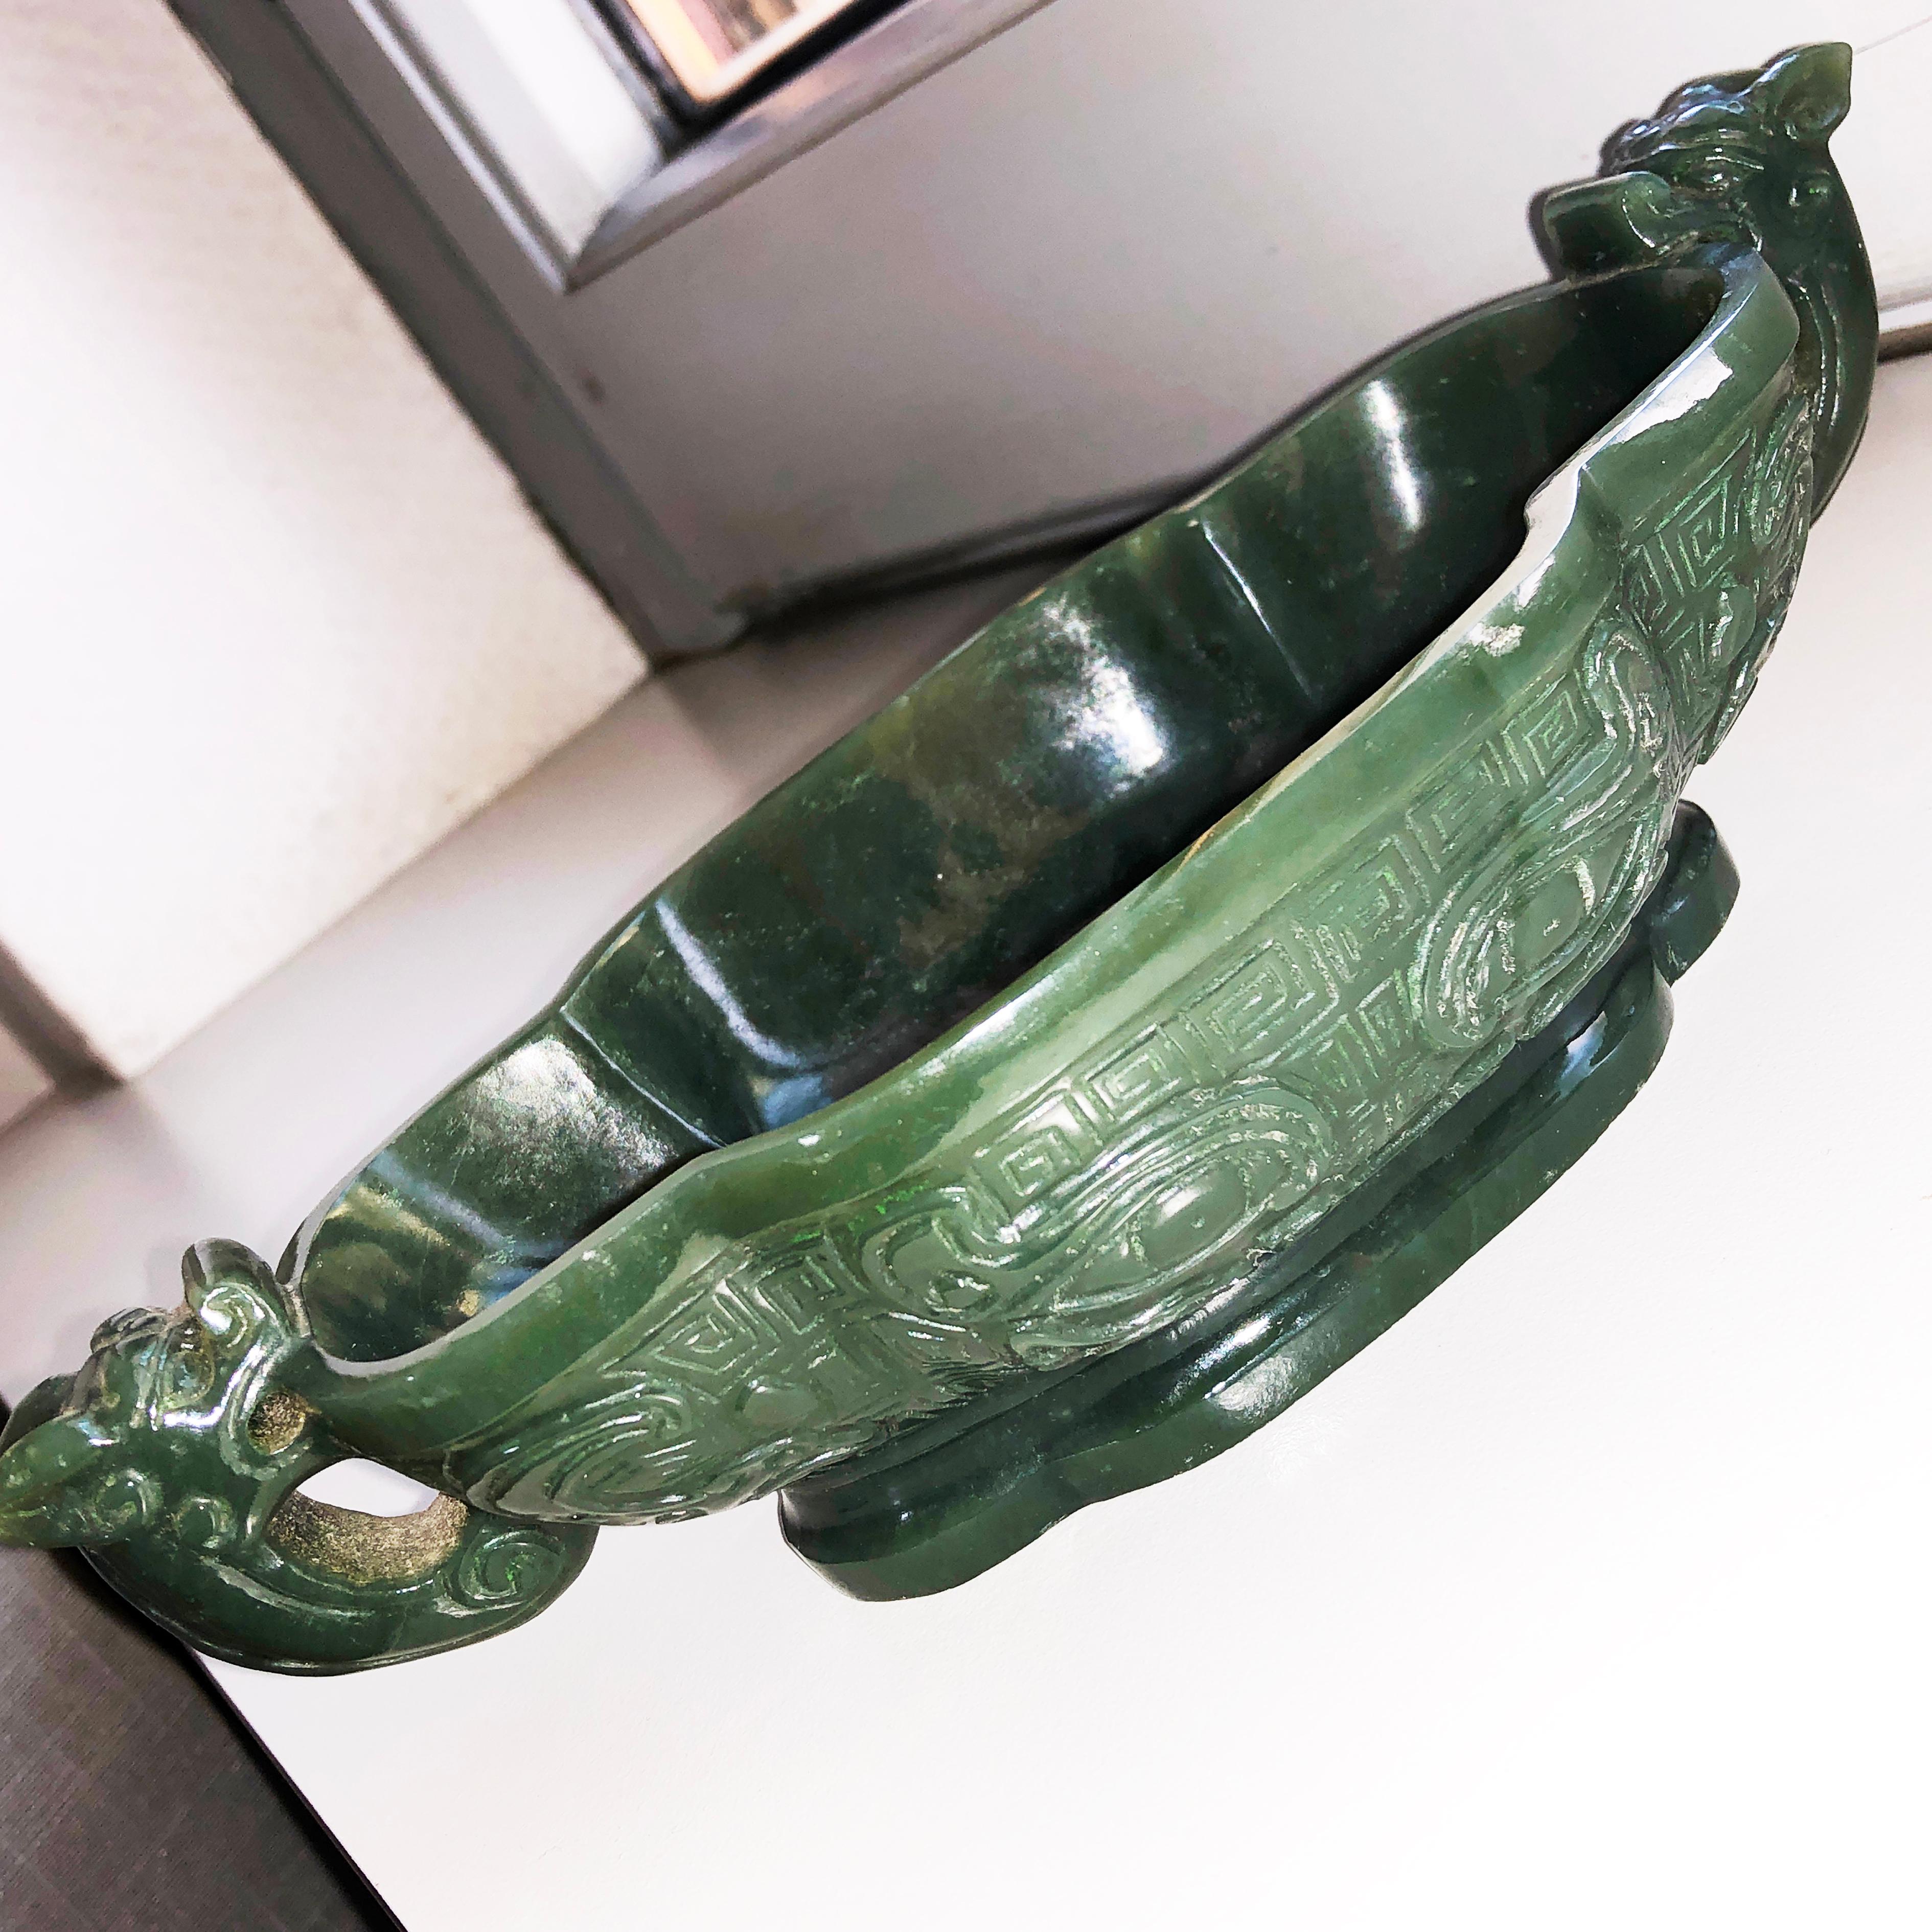 One-of-a-kind, Original 1930, Chinese Export Natural Jadeite Dragon Bowl. Hand Carving and Engraving Work is Beautifully Crisp and Detailed. 
In Chinese Culture Dragon symbolizes the Emperor or the Male Element Yang. Dragons are  Symbol of Power and